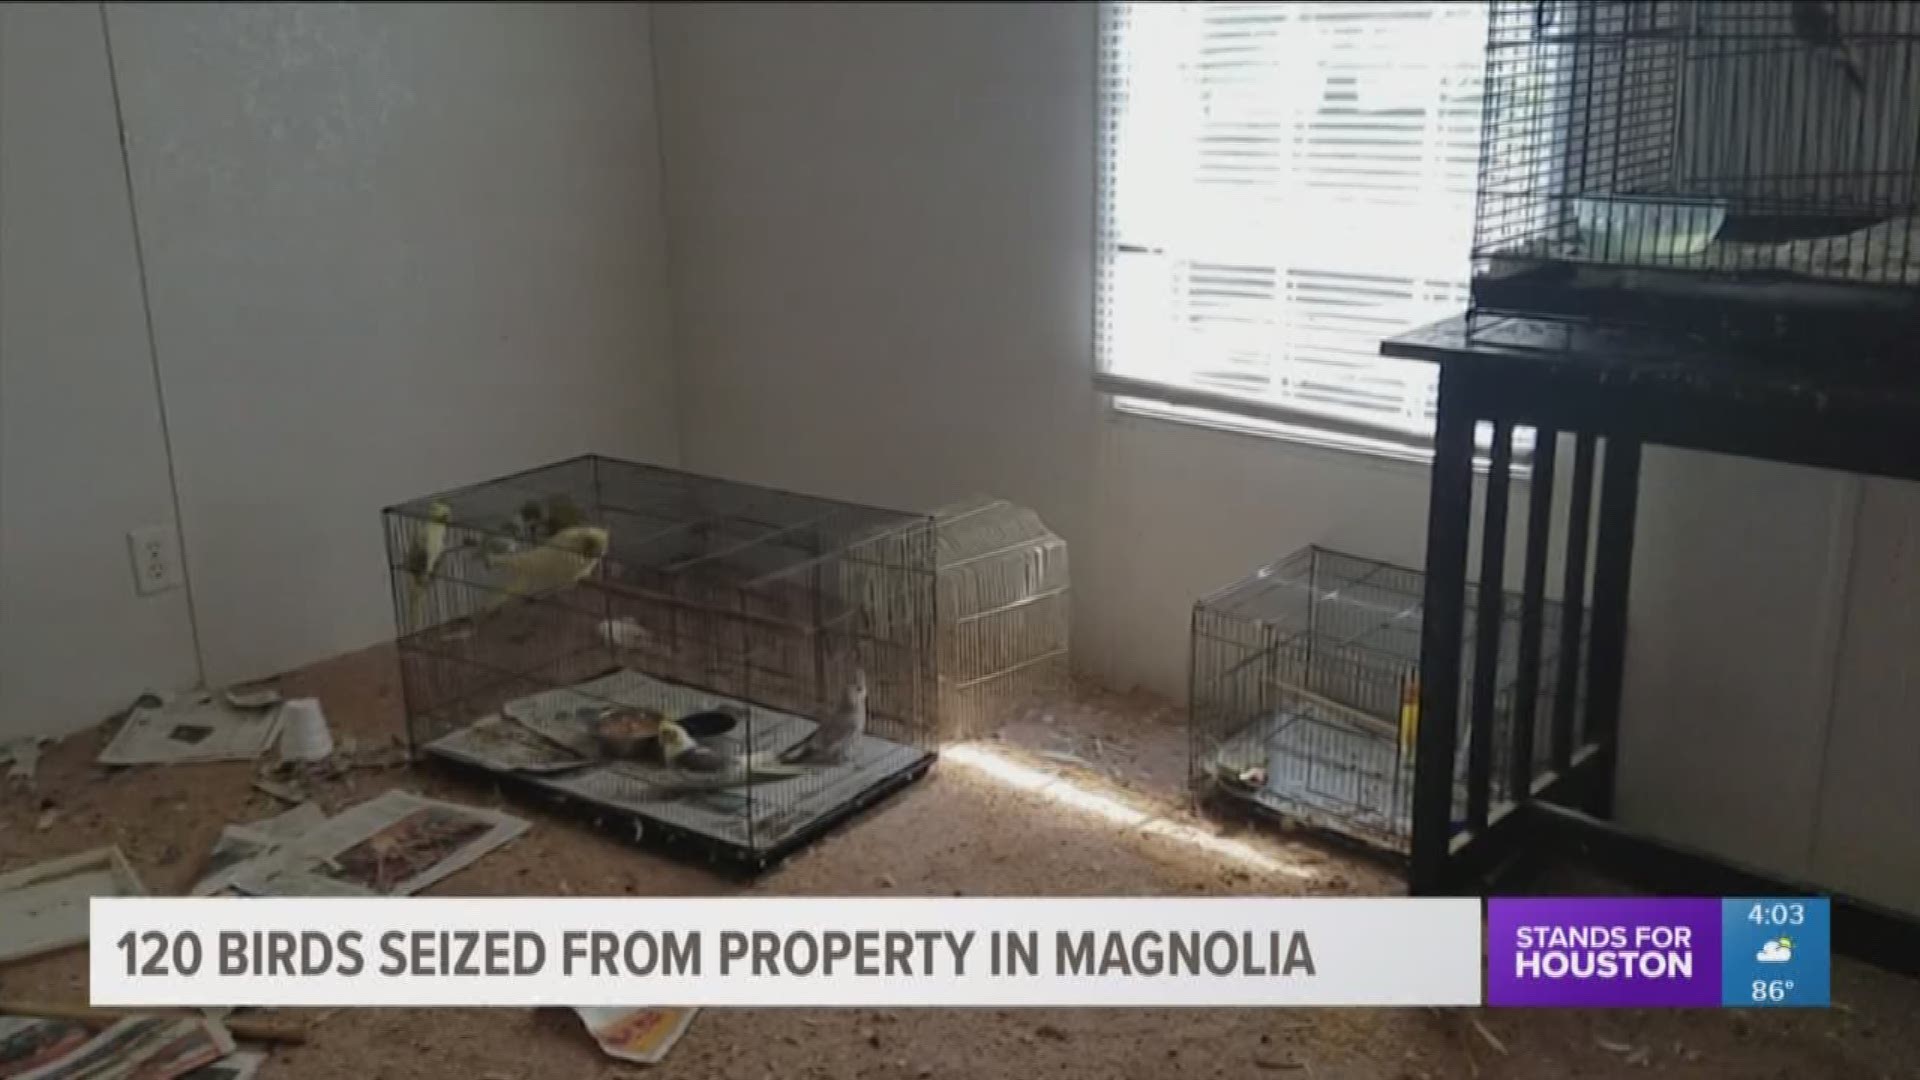 More than 100 birds were rescued from deplorable conditions Tuesday at a property in Magnolia.